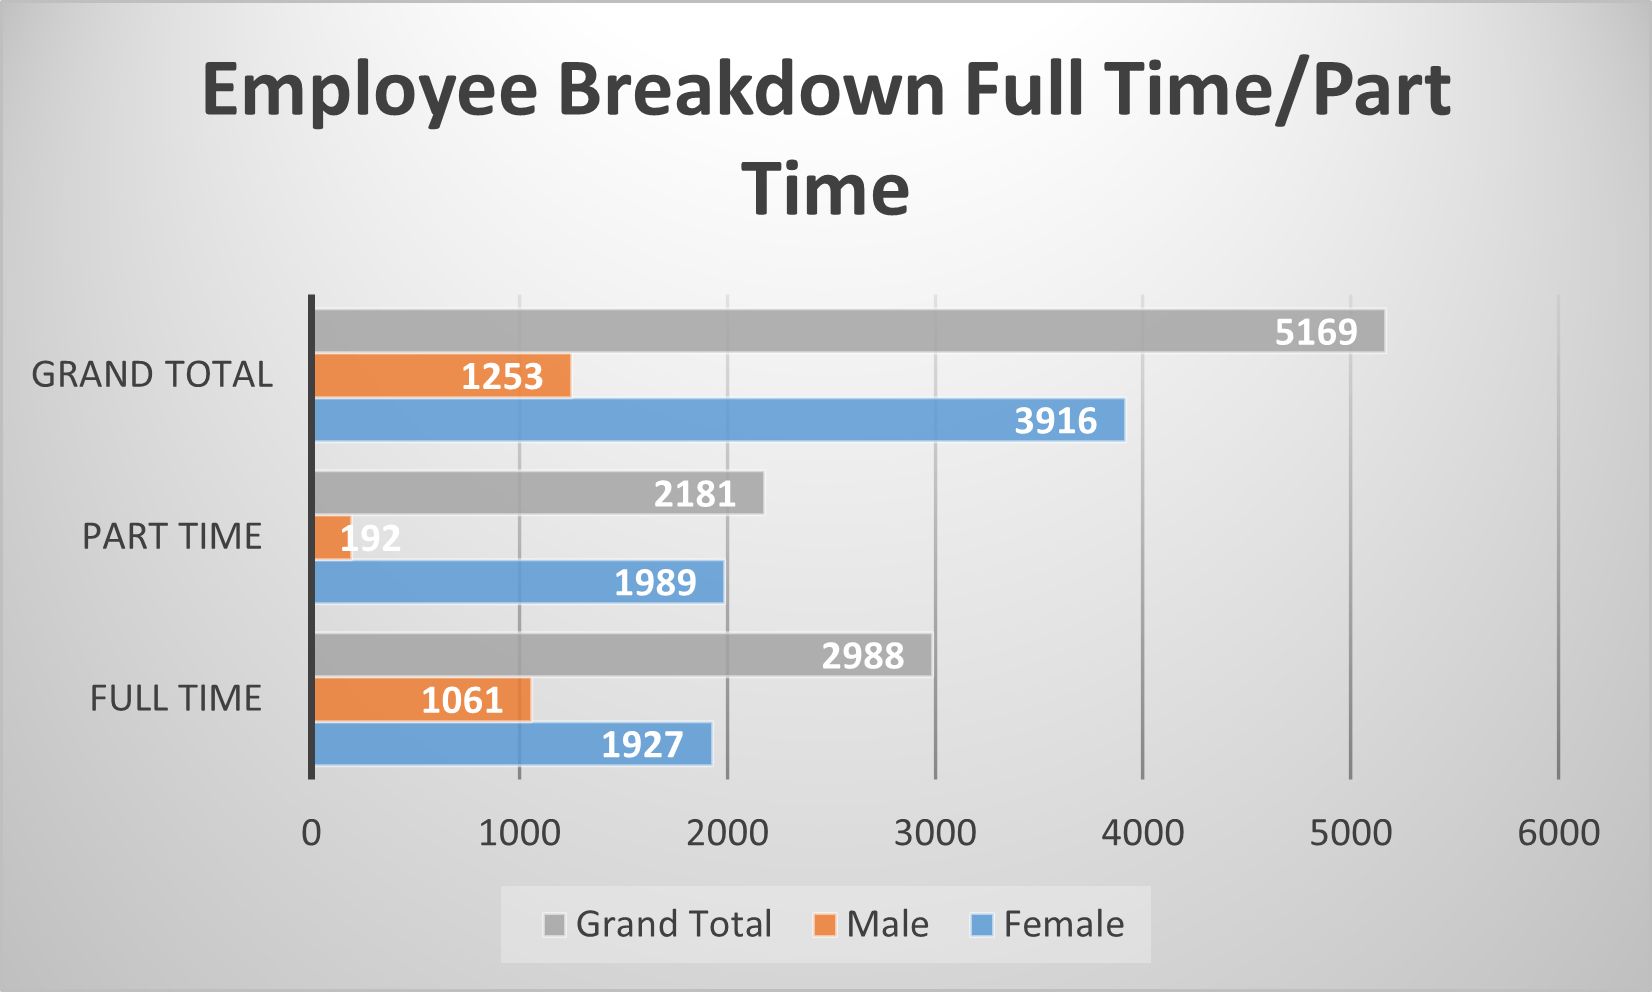 Full Time Male 1061, Female 1927, Grand total 2988,  Part Time Male 192, Female 1989, Grand total 2181,  Grand Total, Male 1253, Female 3916, Grand total 5169